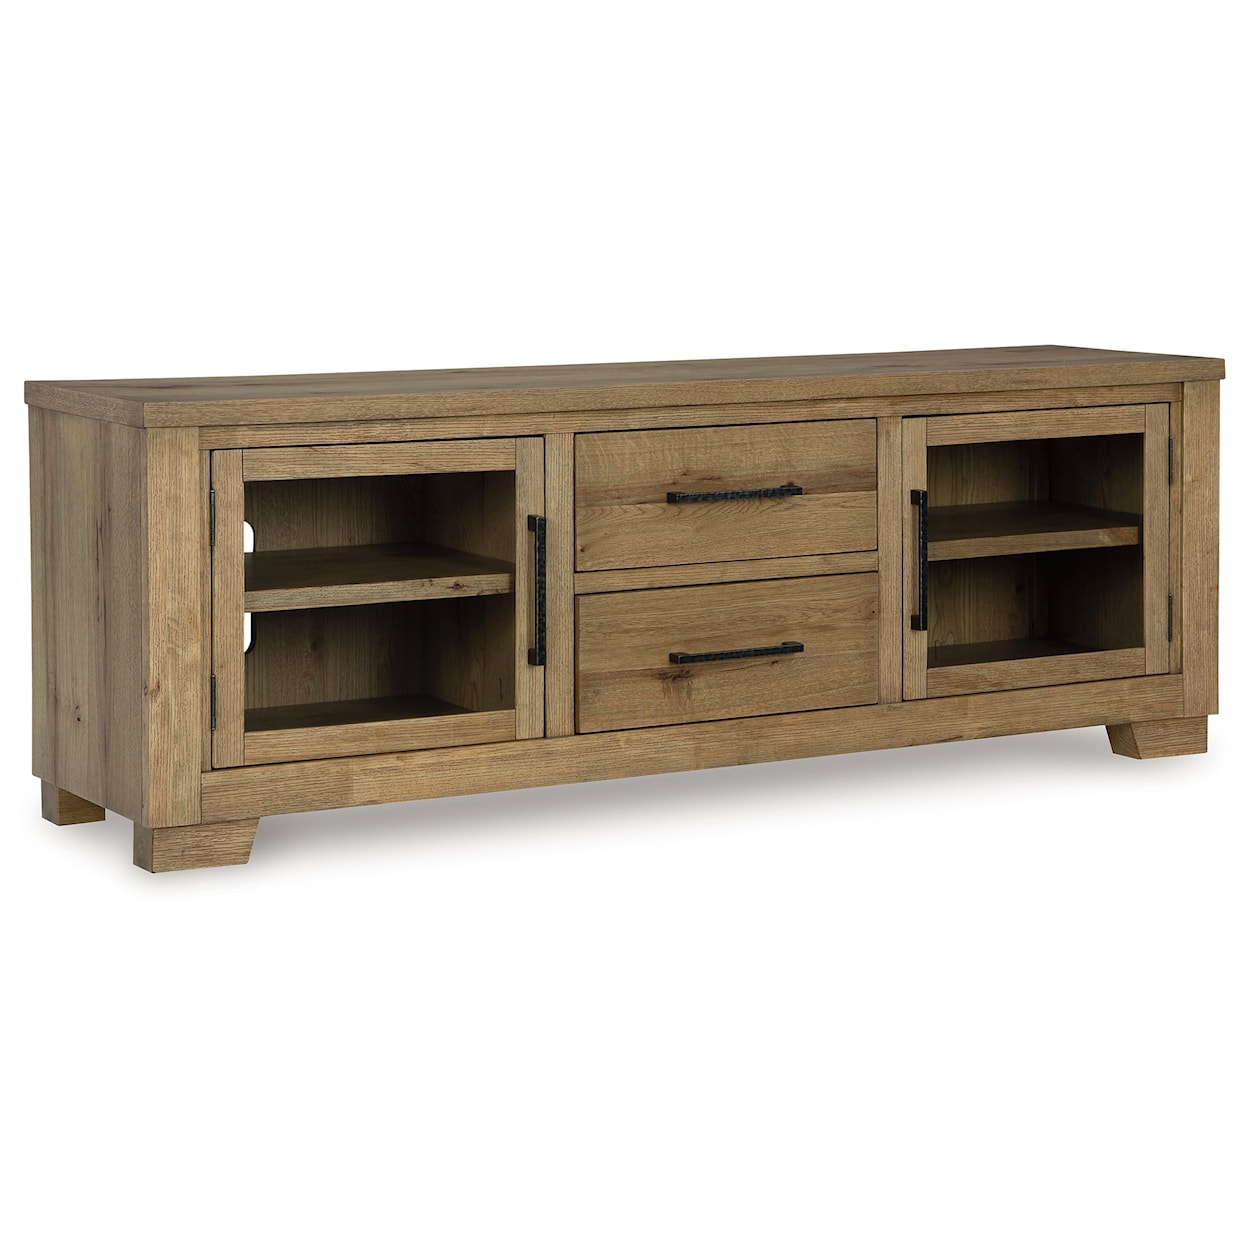 Benchcraft Galliden Extra Large TV Stand